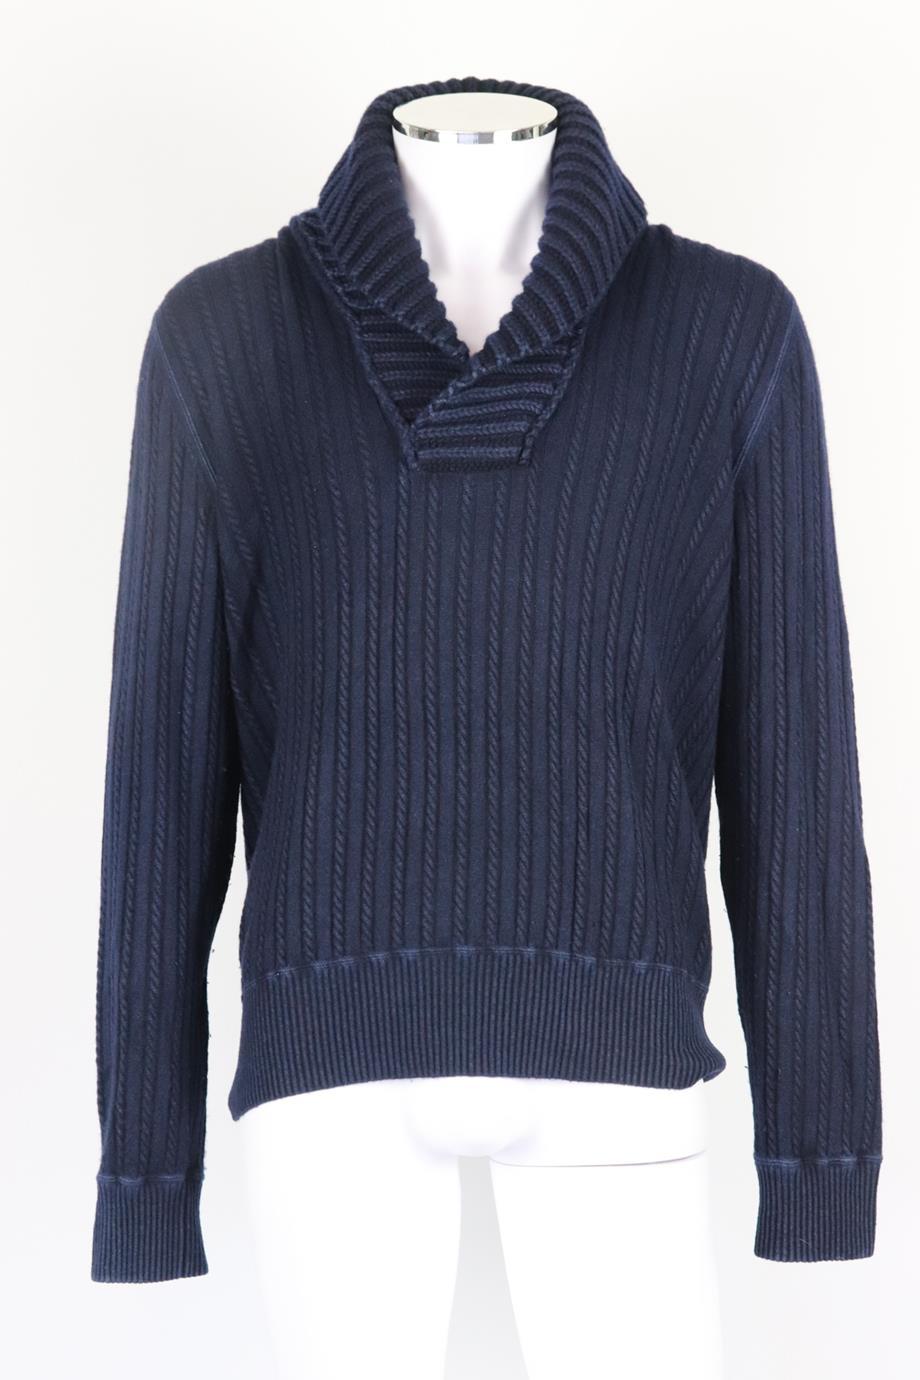 Yves Saint Laurent men's cable knit cashmere sweater. Navy. Long sleeve, v-neck. Pull on.100% Cashmere. Size: XLarge (UK/US Chest 42, IT 52). Chest: 44 in. Waist: 42 in. Hips: 40 in. Length: 26 in. Very good condition - Small pull at front. Light